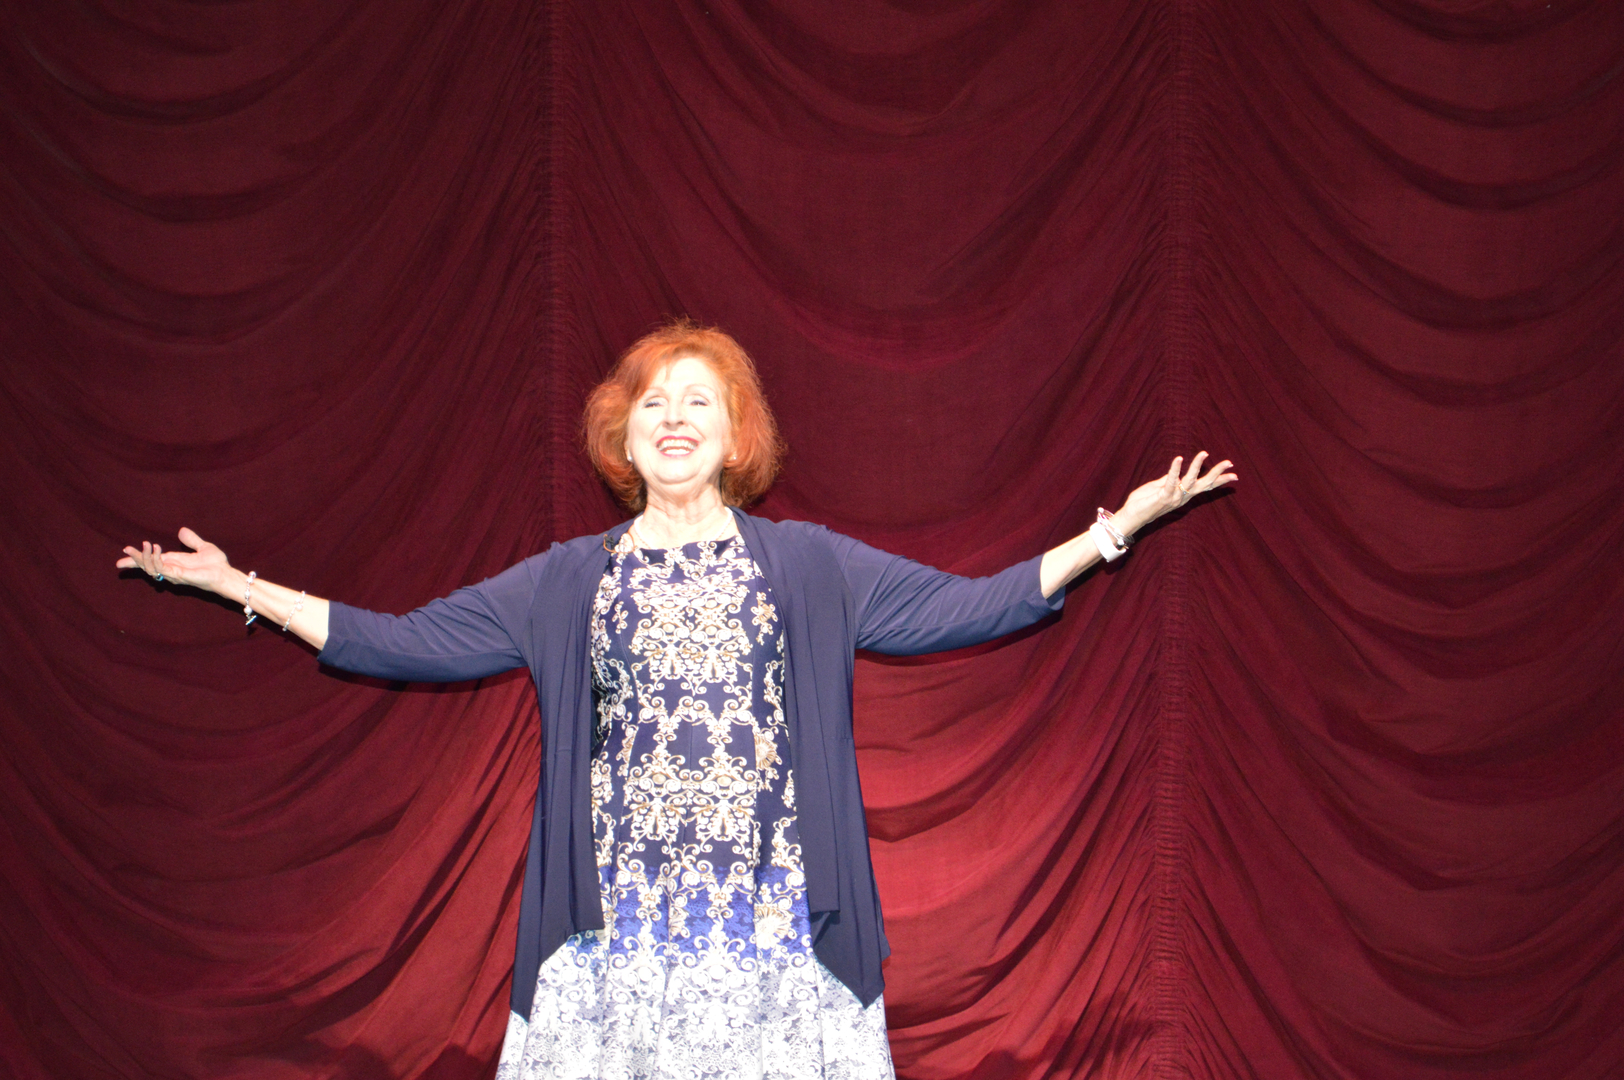 A woman standing on stage with her arms outstretched.